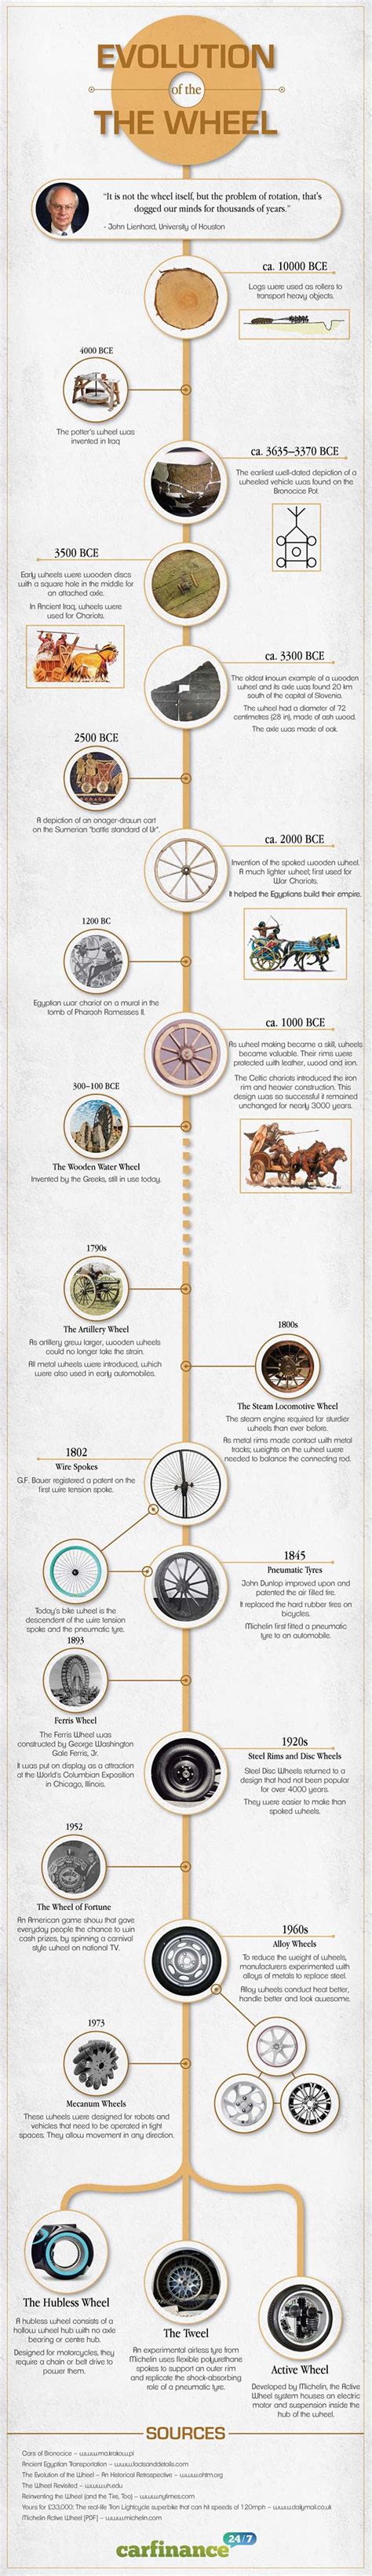 Infographic The Evolution Of The Wheel